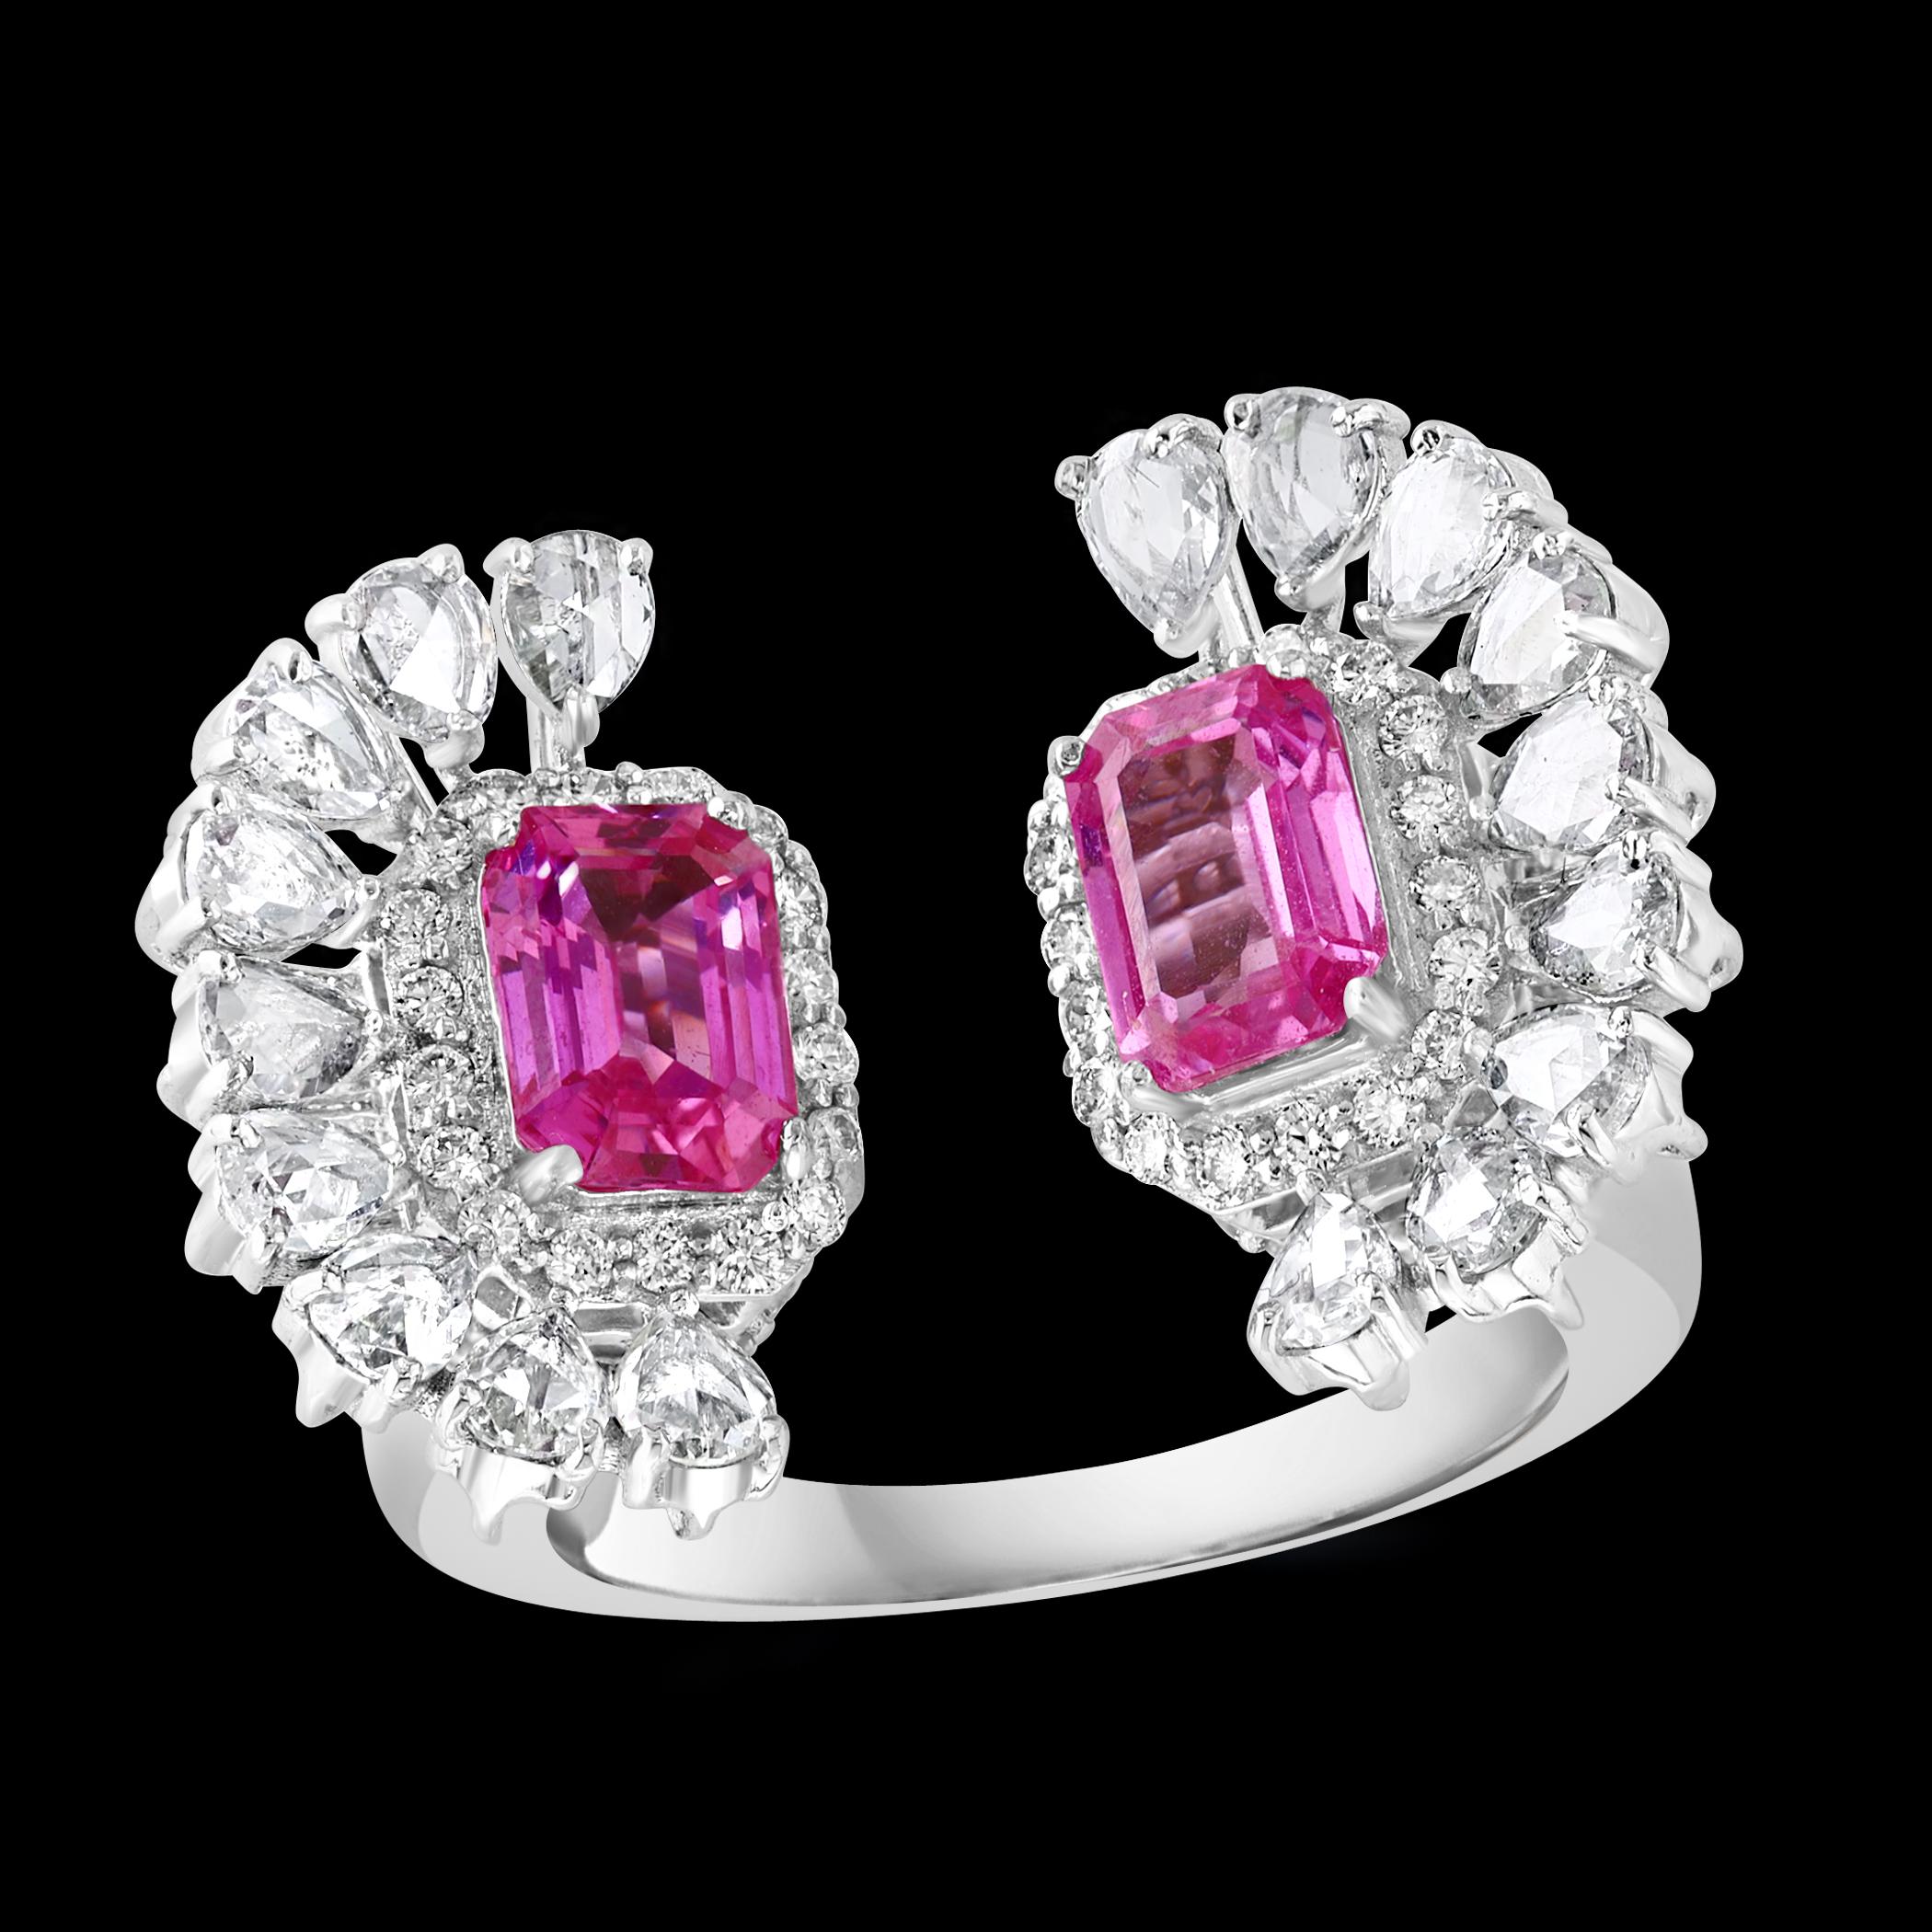 Cushion Cut 2.5 Ct Pink Emerald Cut Pink  Sapphire & 2.8 Ct Diamond 18 Kt White Gold Ring S6 For Sale